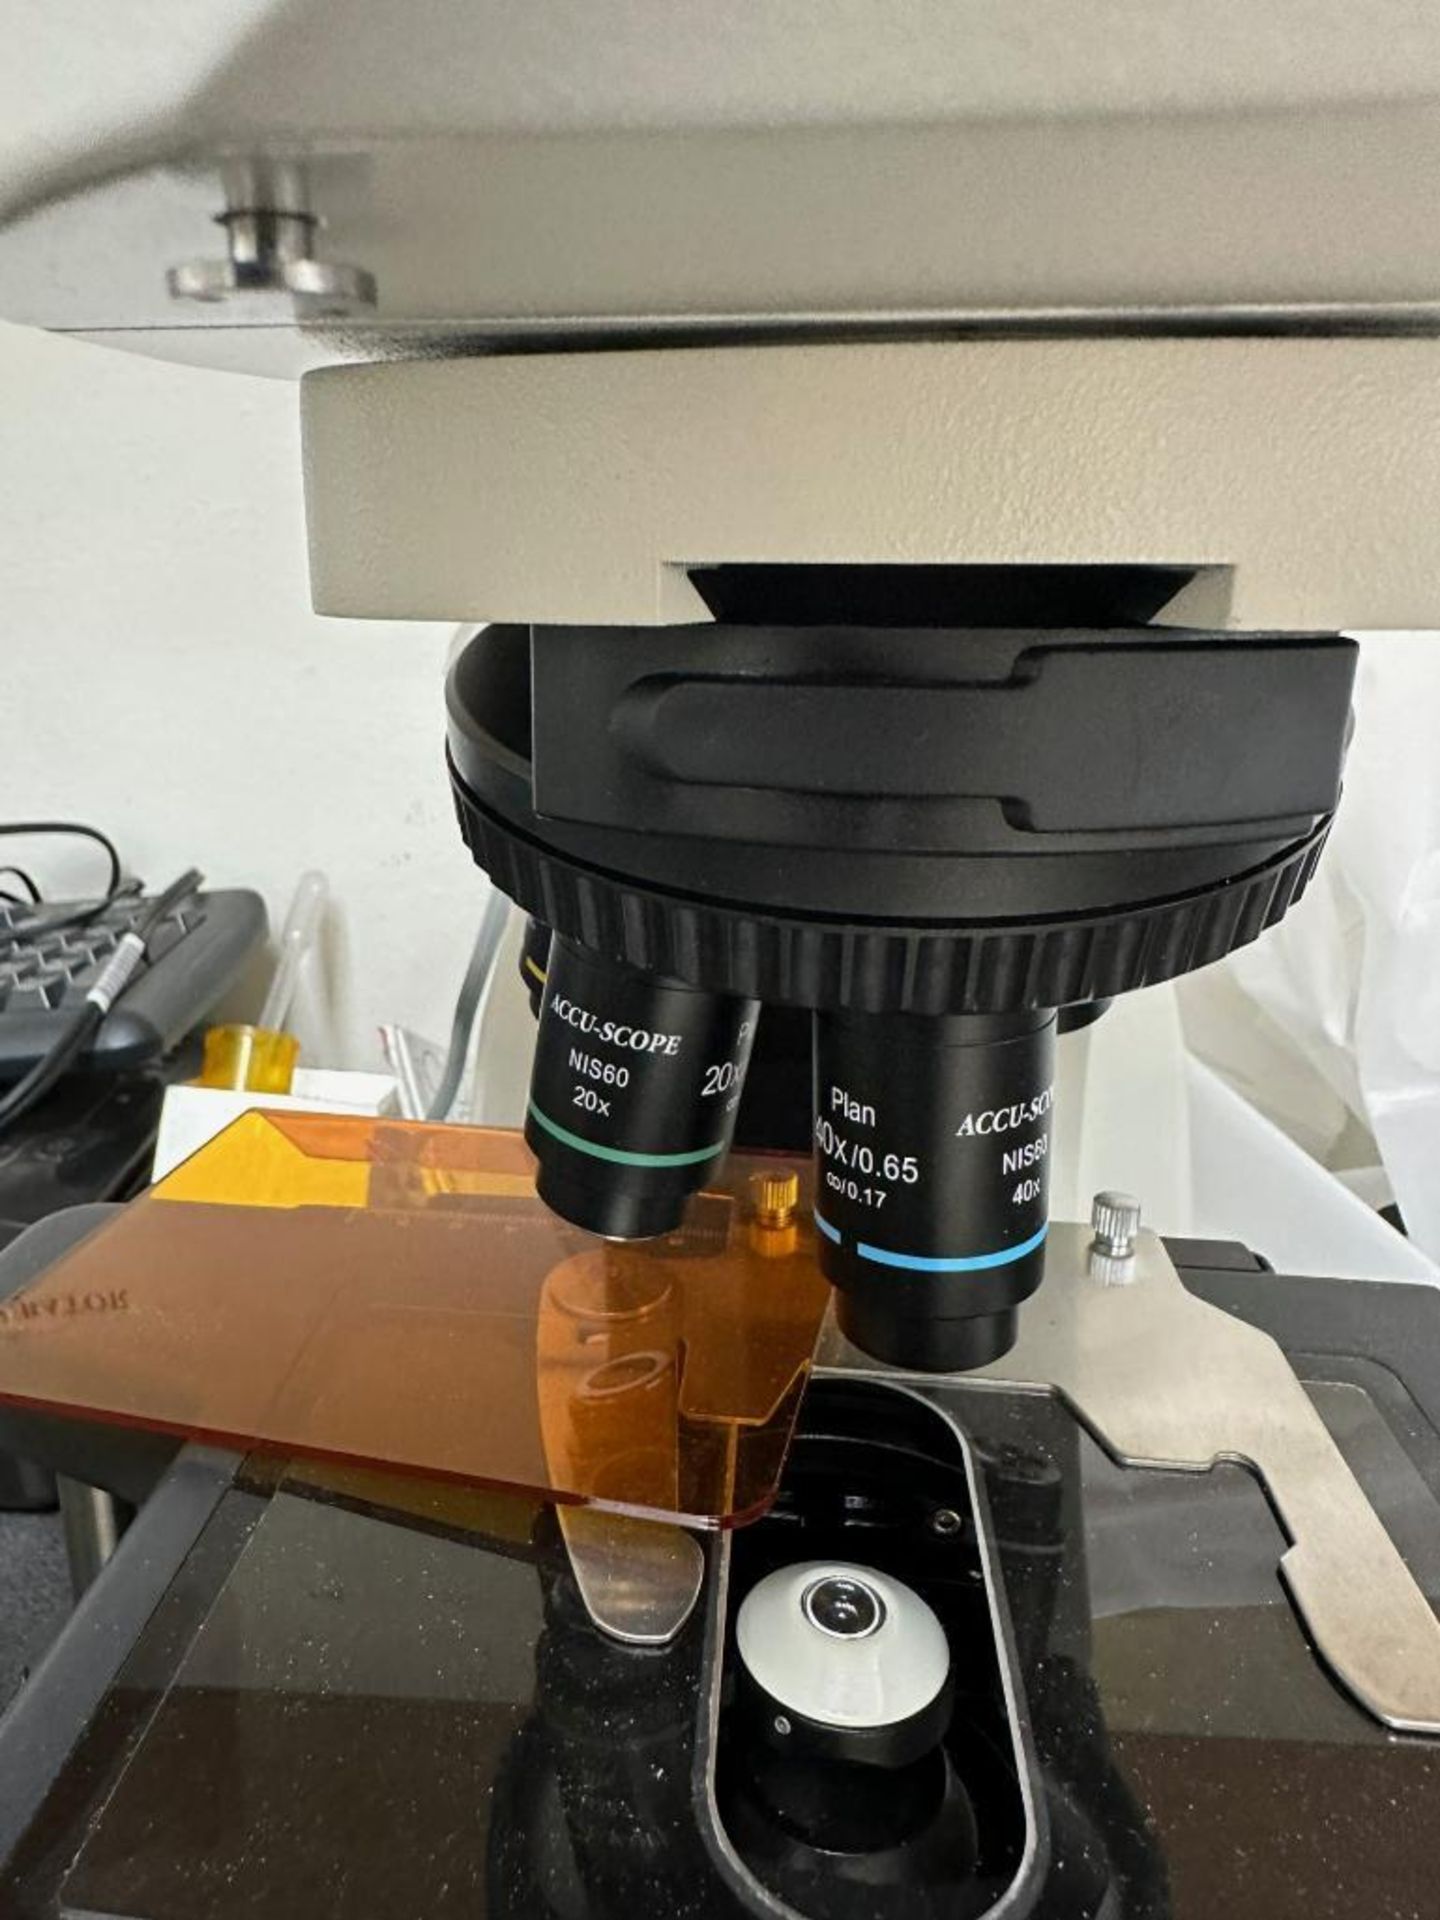 ACCU-SCOPE LAB MICROSCOPE WITH 5 OBJECTIVES - Image 5 of 6